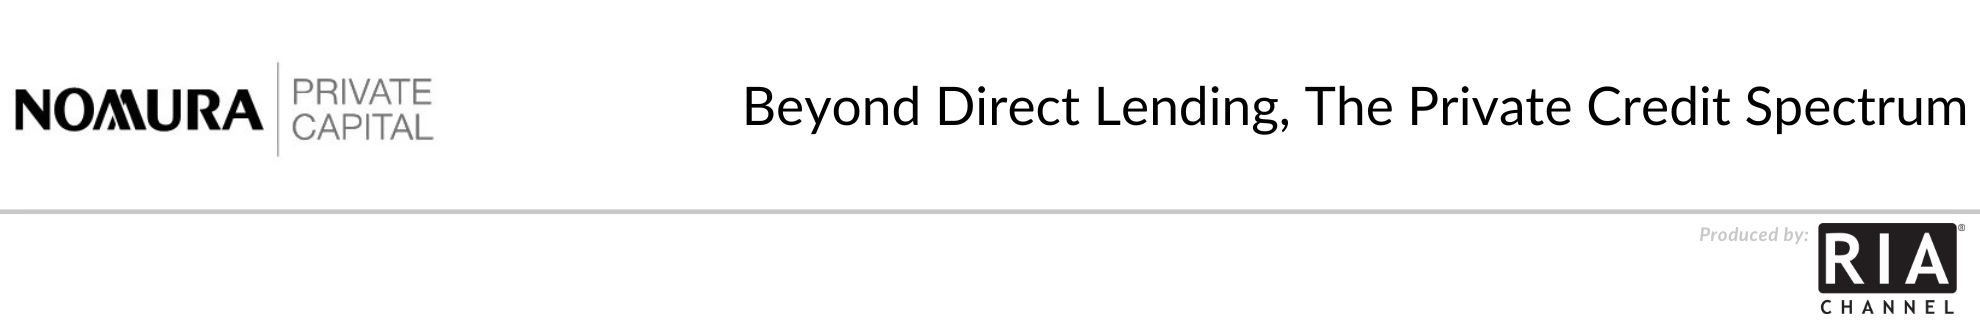 Beyond Direct Lending, The Private Credit Spectrum